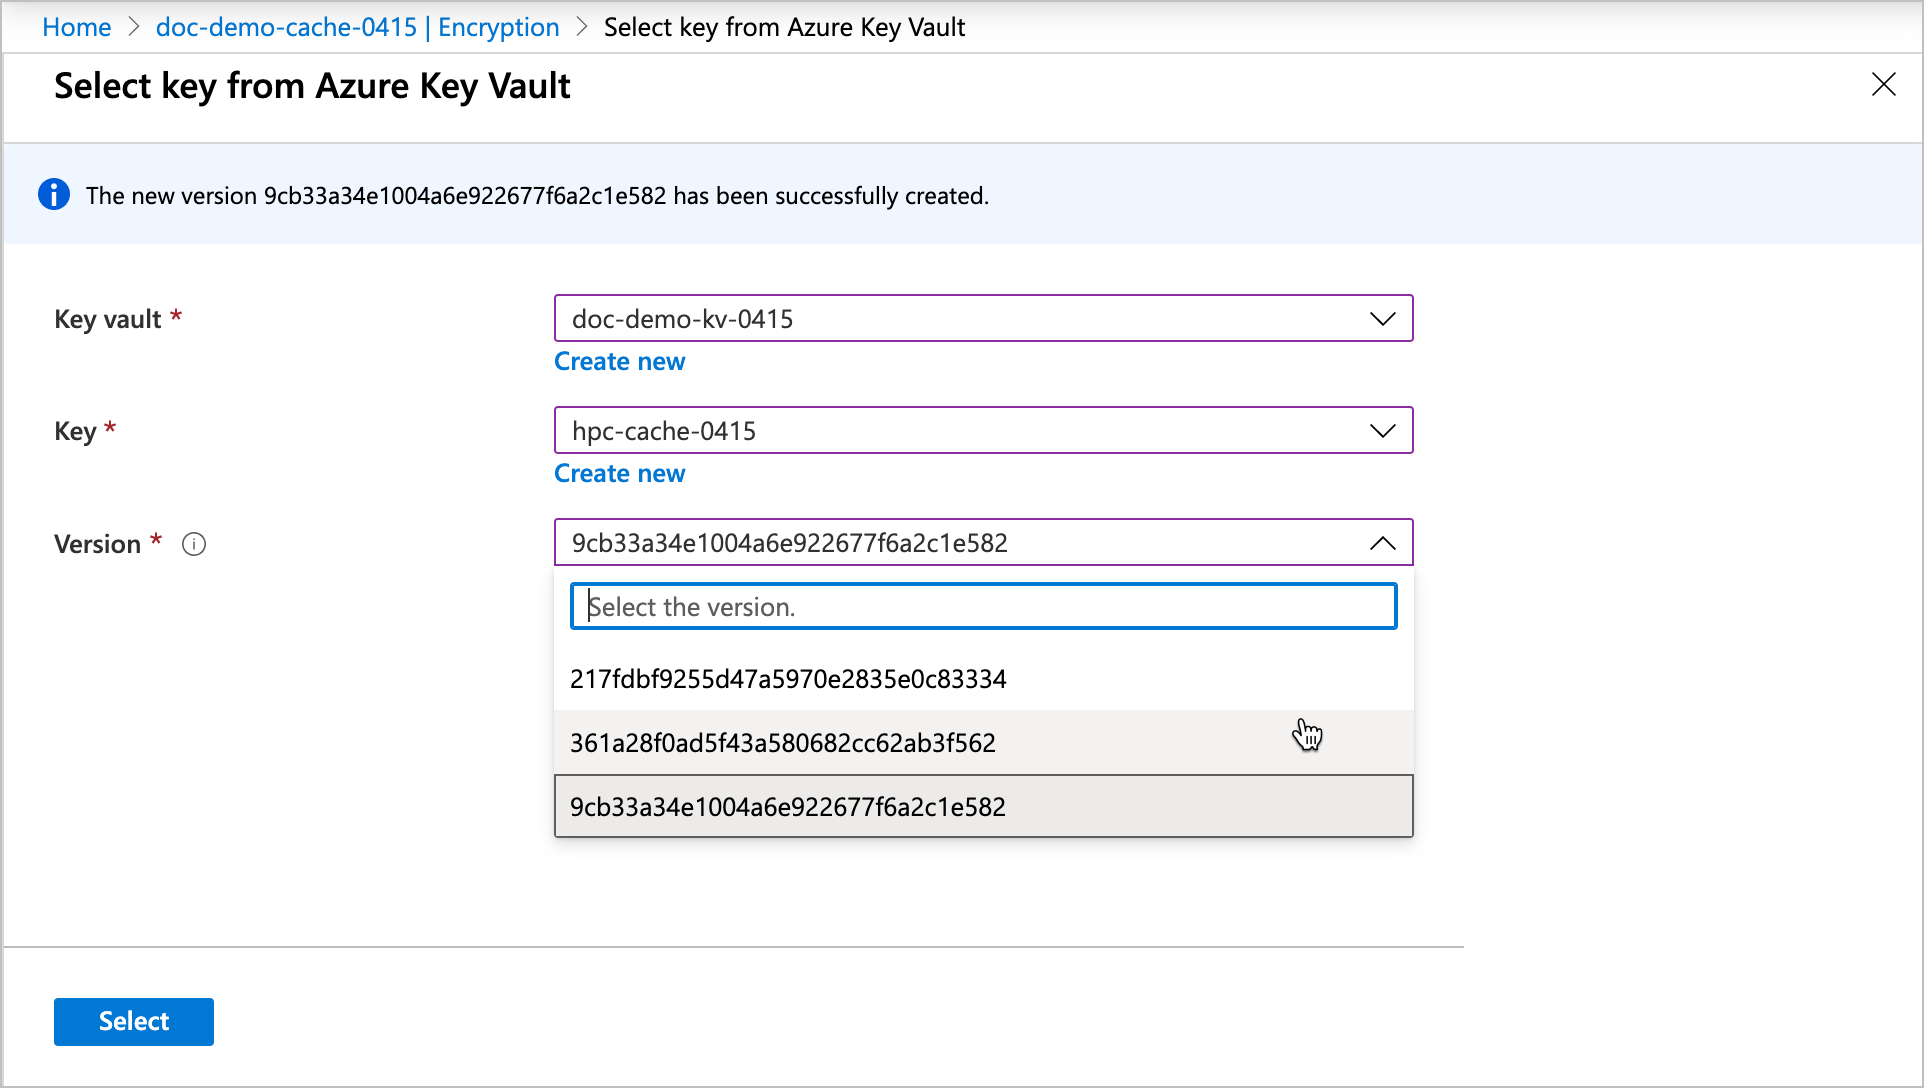 Screenshot of "select key from Azure Key Vault" page with three drop-down selectors to choose key vault, key, and version.